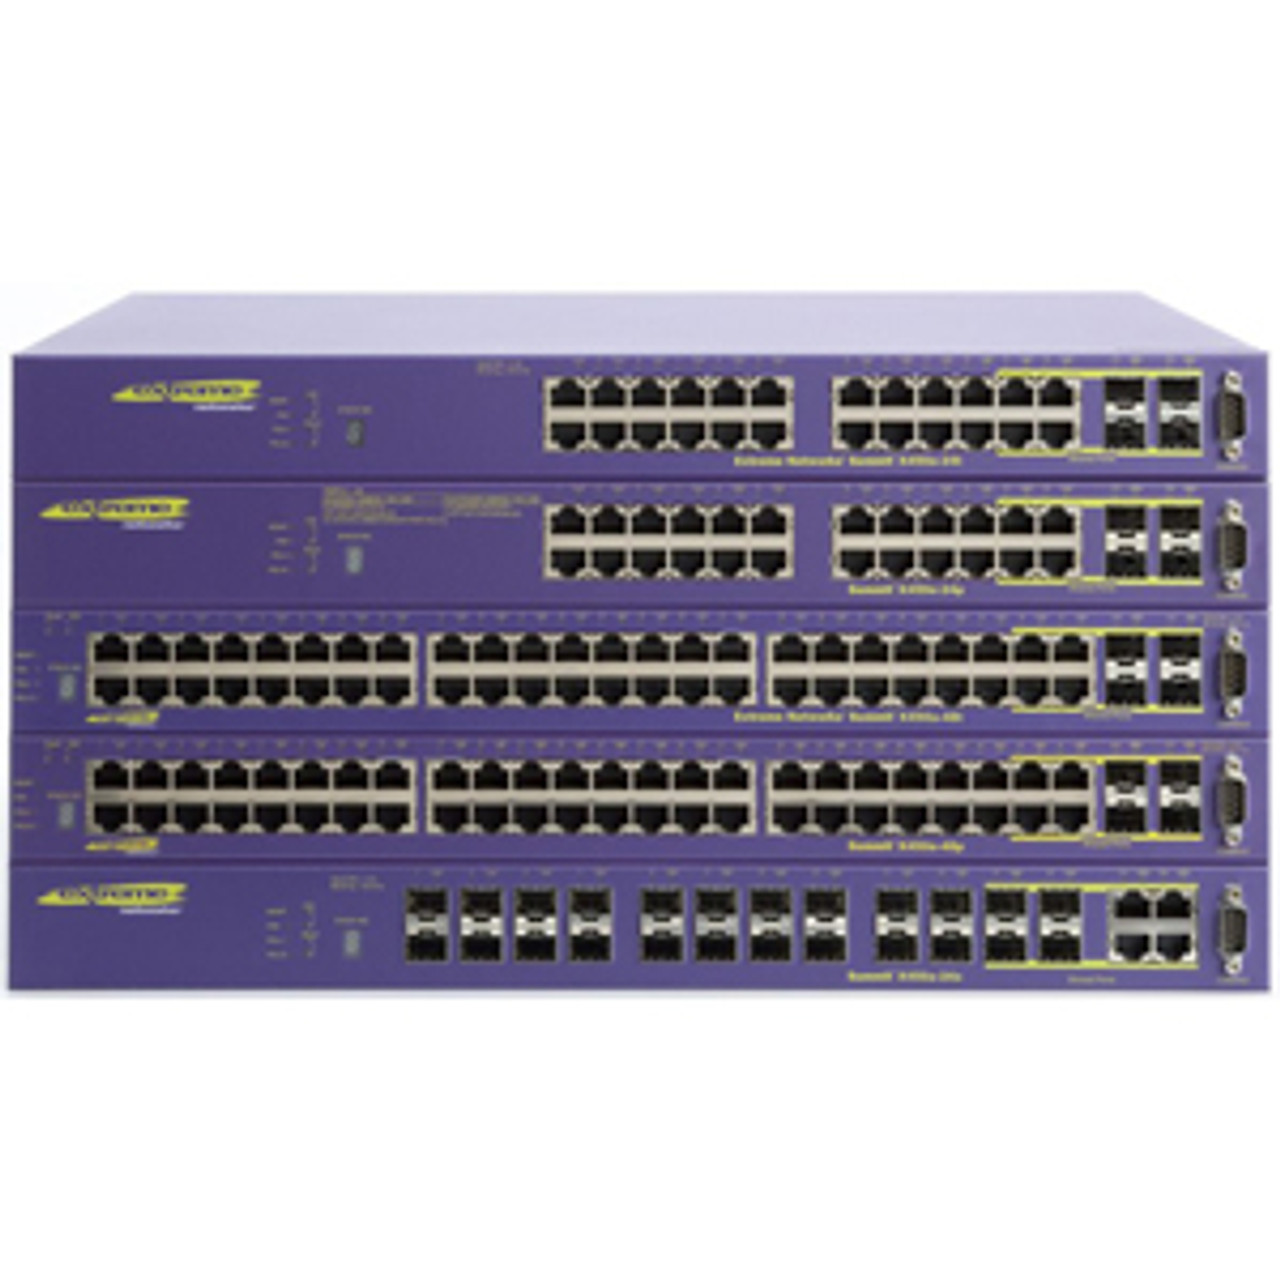 16148T Extreme Networks 48-Ports Fast Ethernet Summit X450e-48p-taa Poe Geth 4pt Sfp Switch (Refurbished)